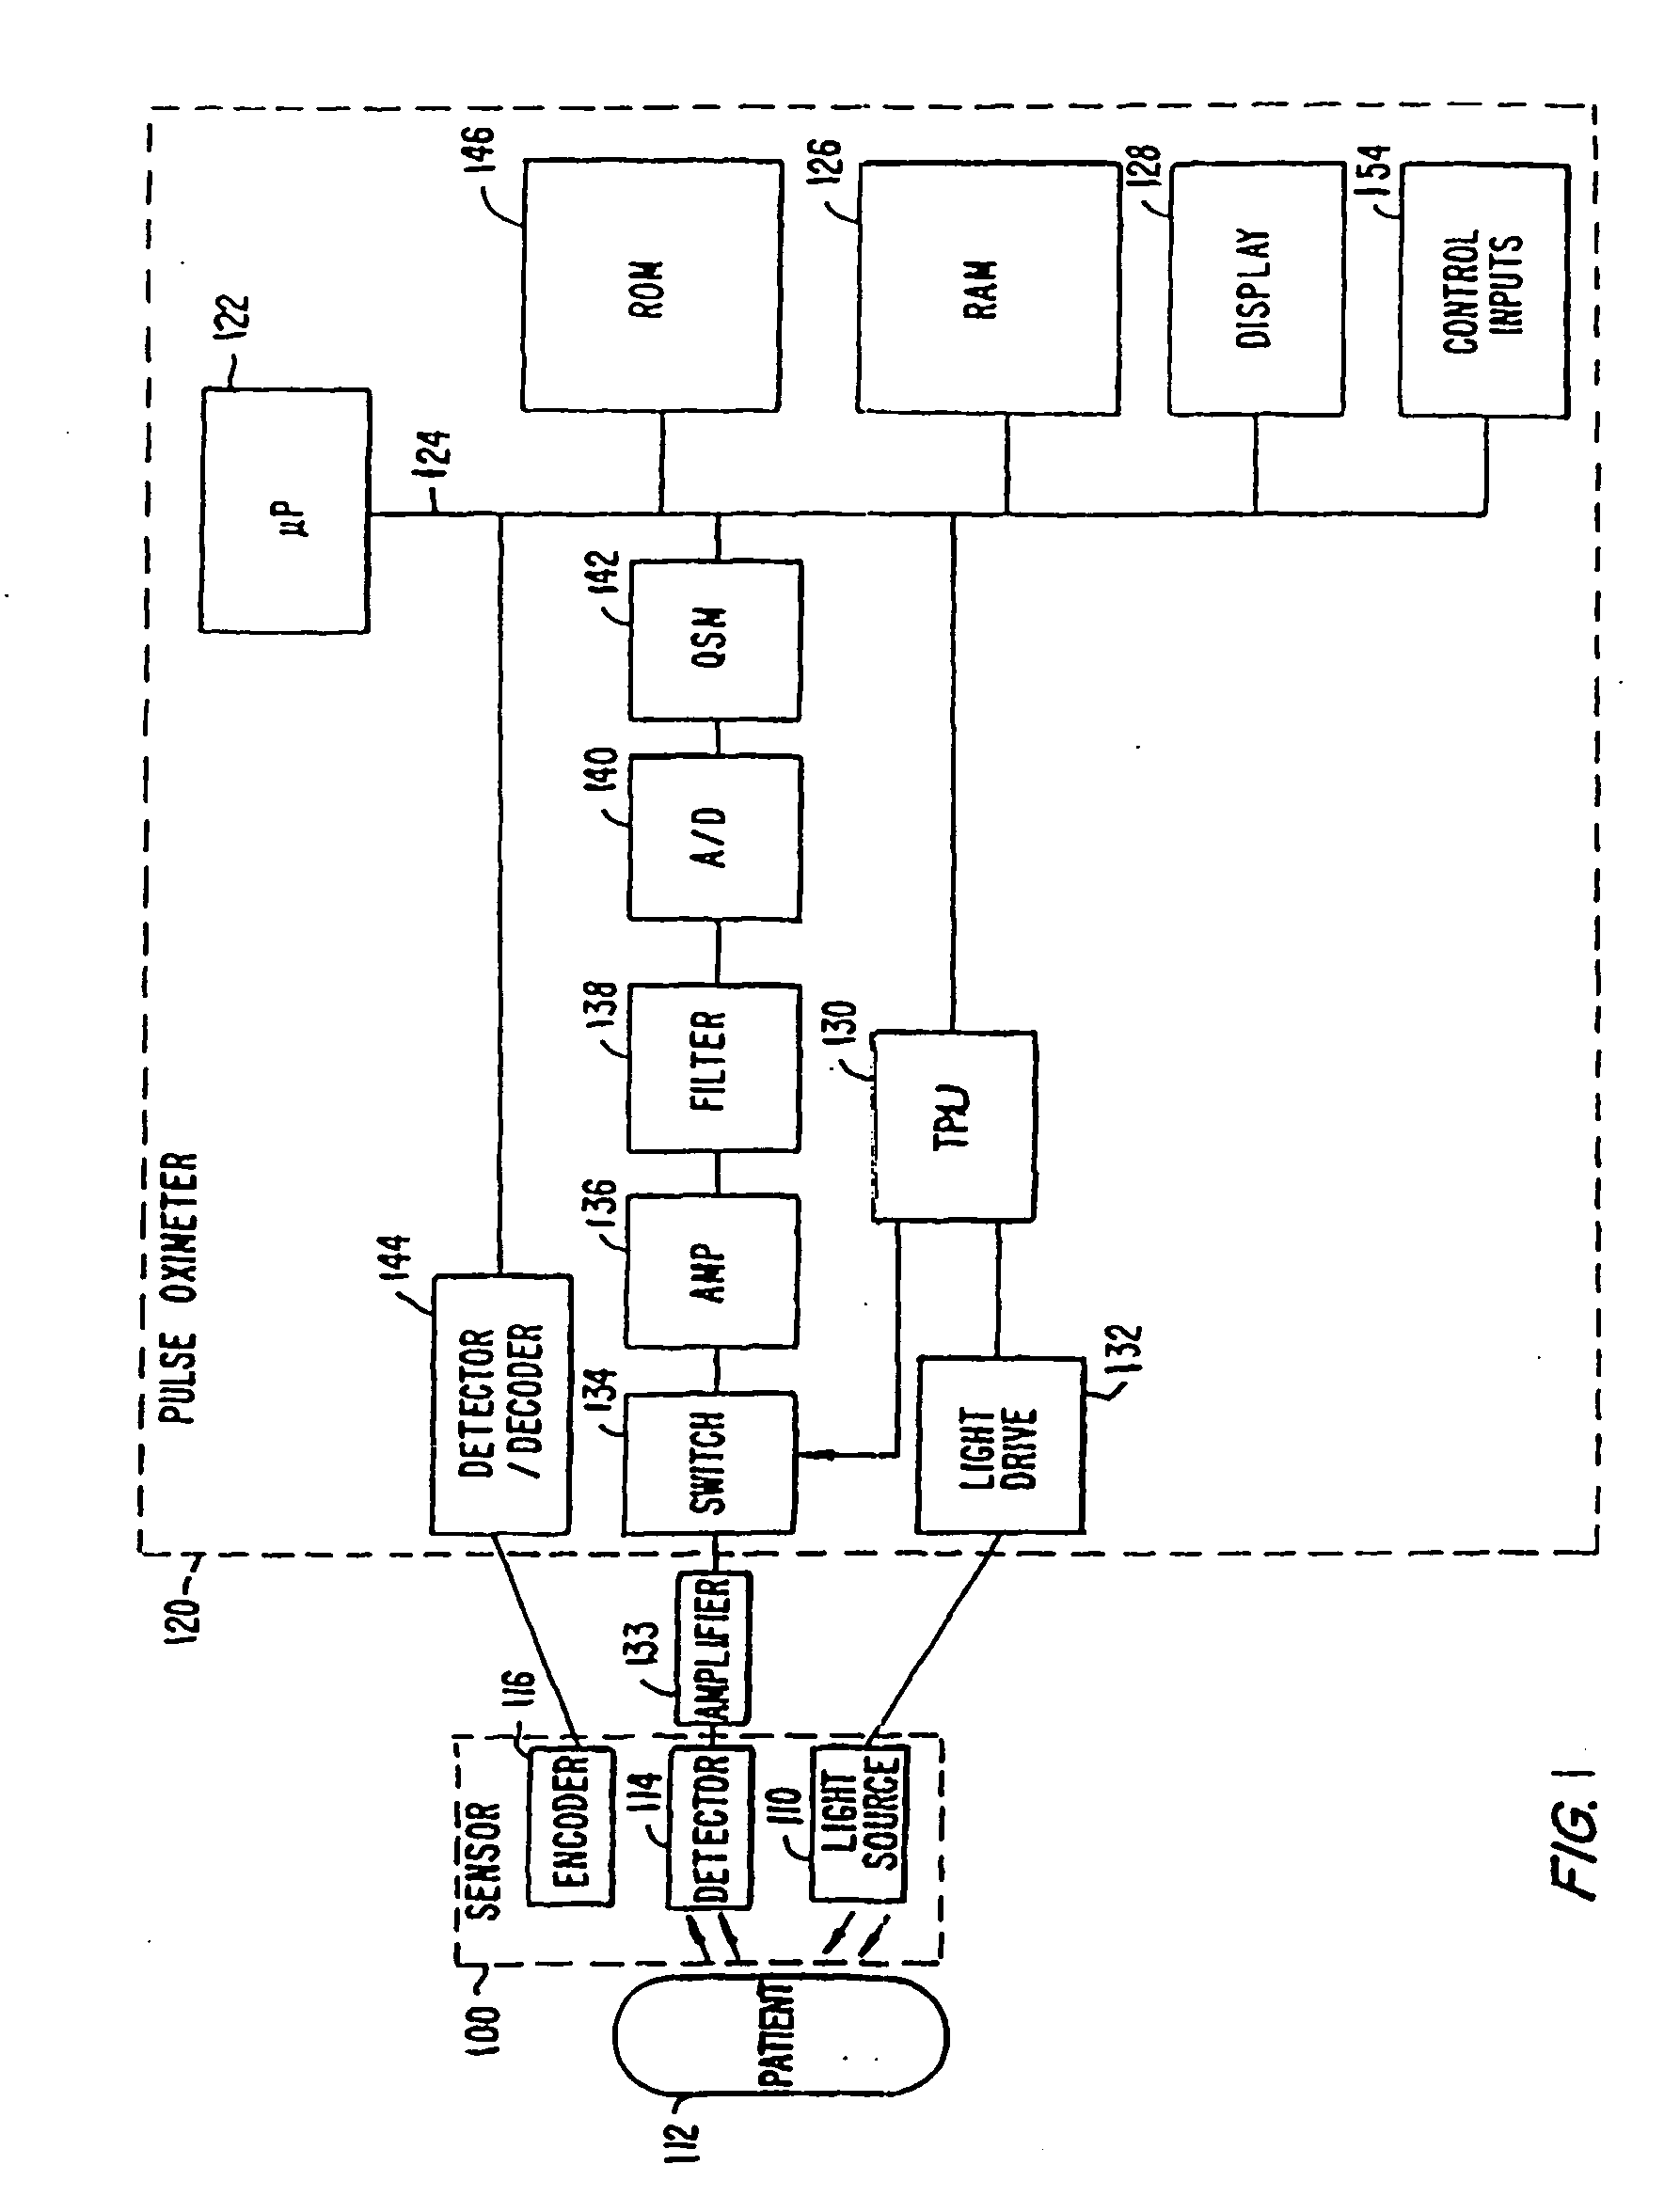 Method and apparatus for optical detection of mixed venous and arterial blood pulsation in tissue